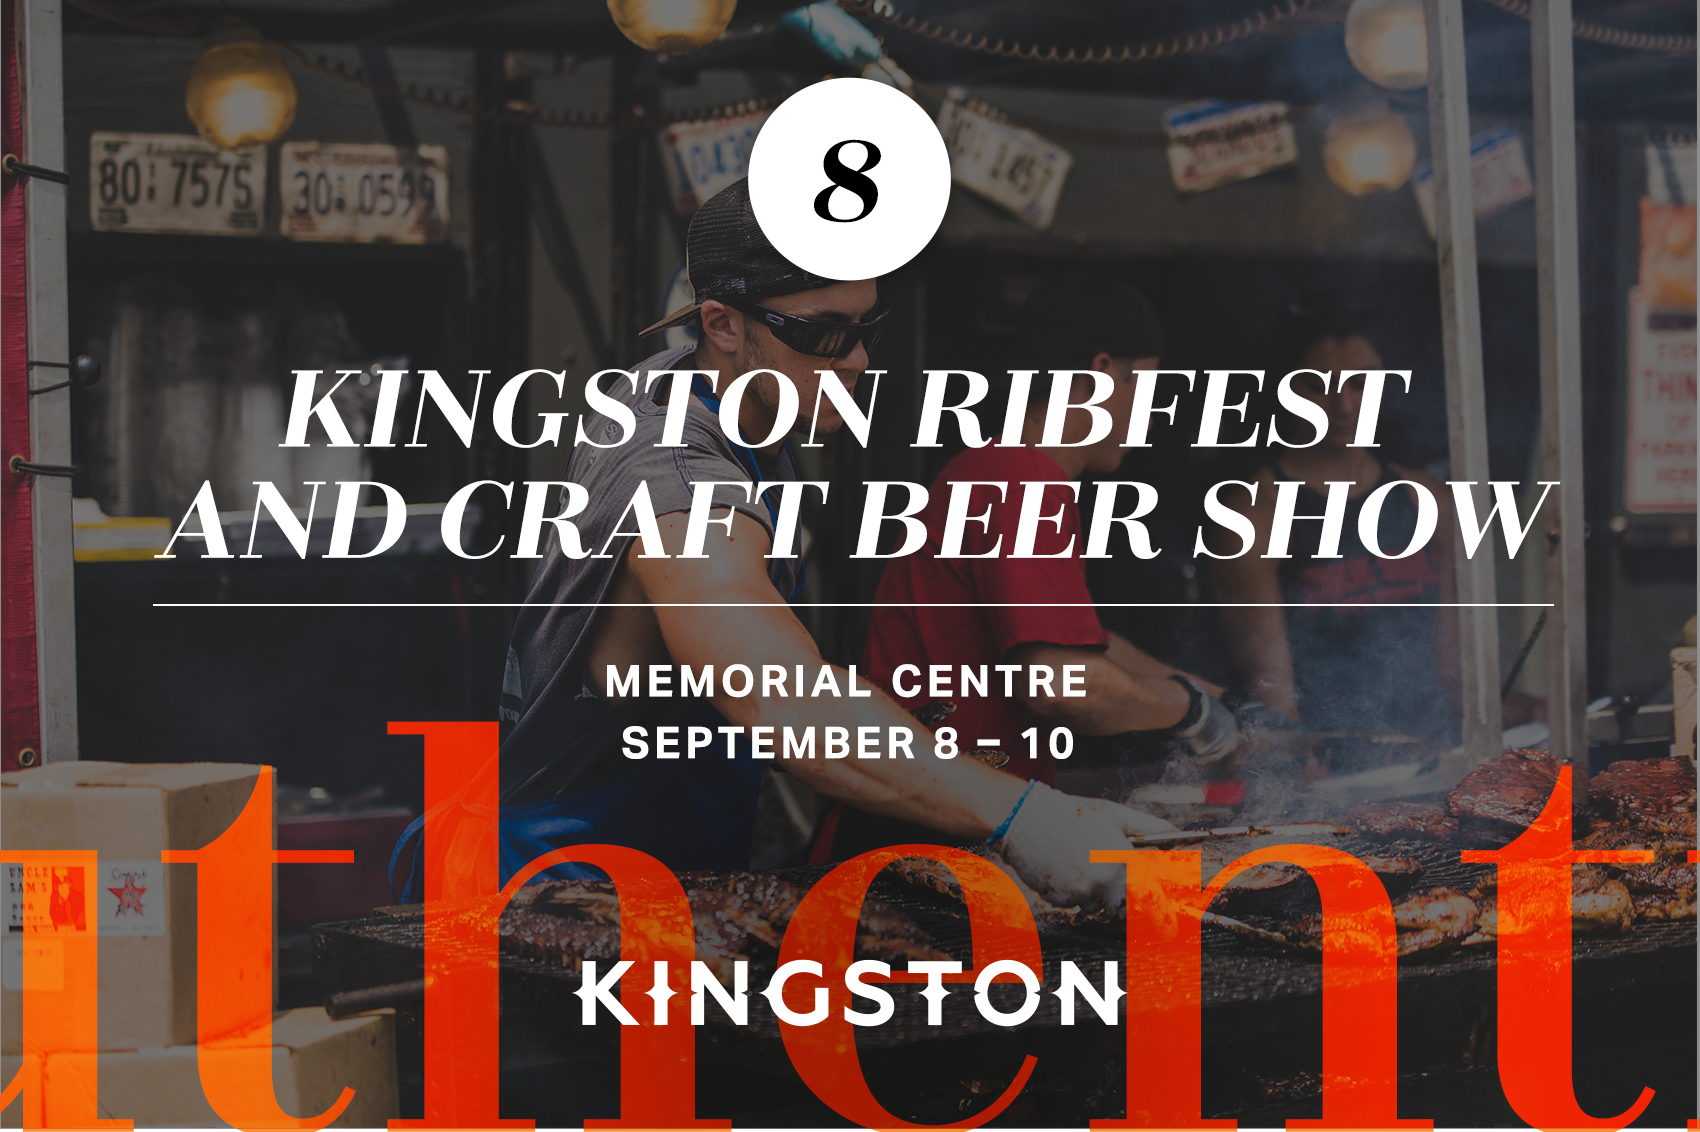 Kingston Ribfest and Craft Beer Show